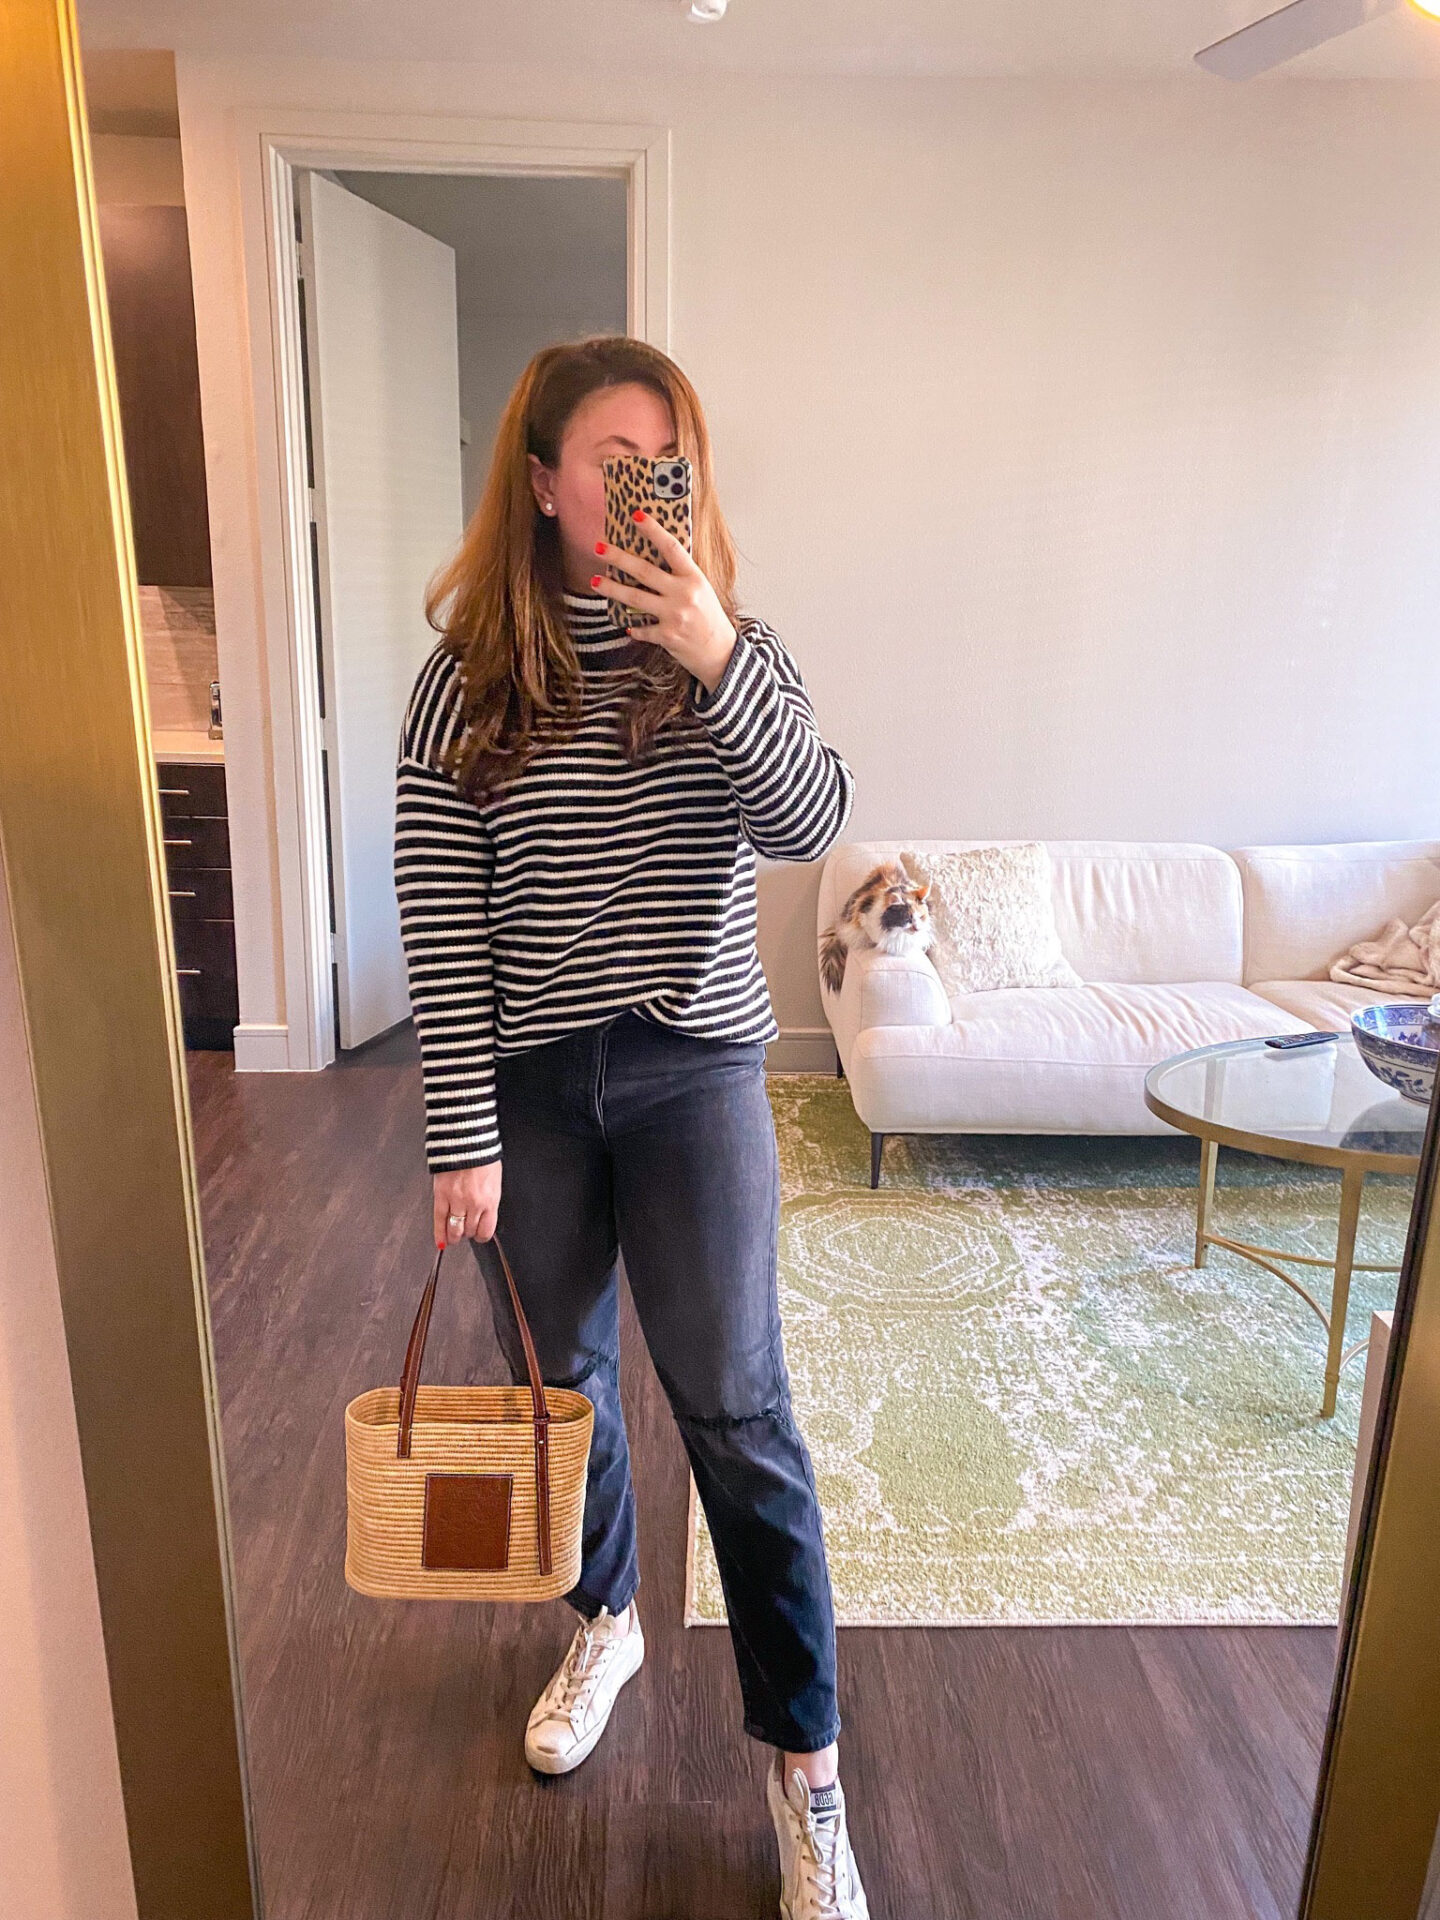 Dallas fashion blogger friday favorites—shows to binge-watch, what's in my cart for spring, and more